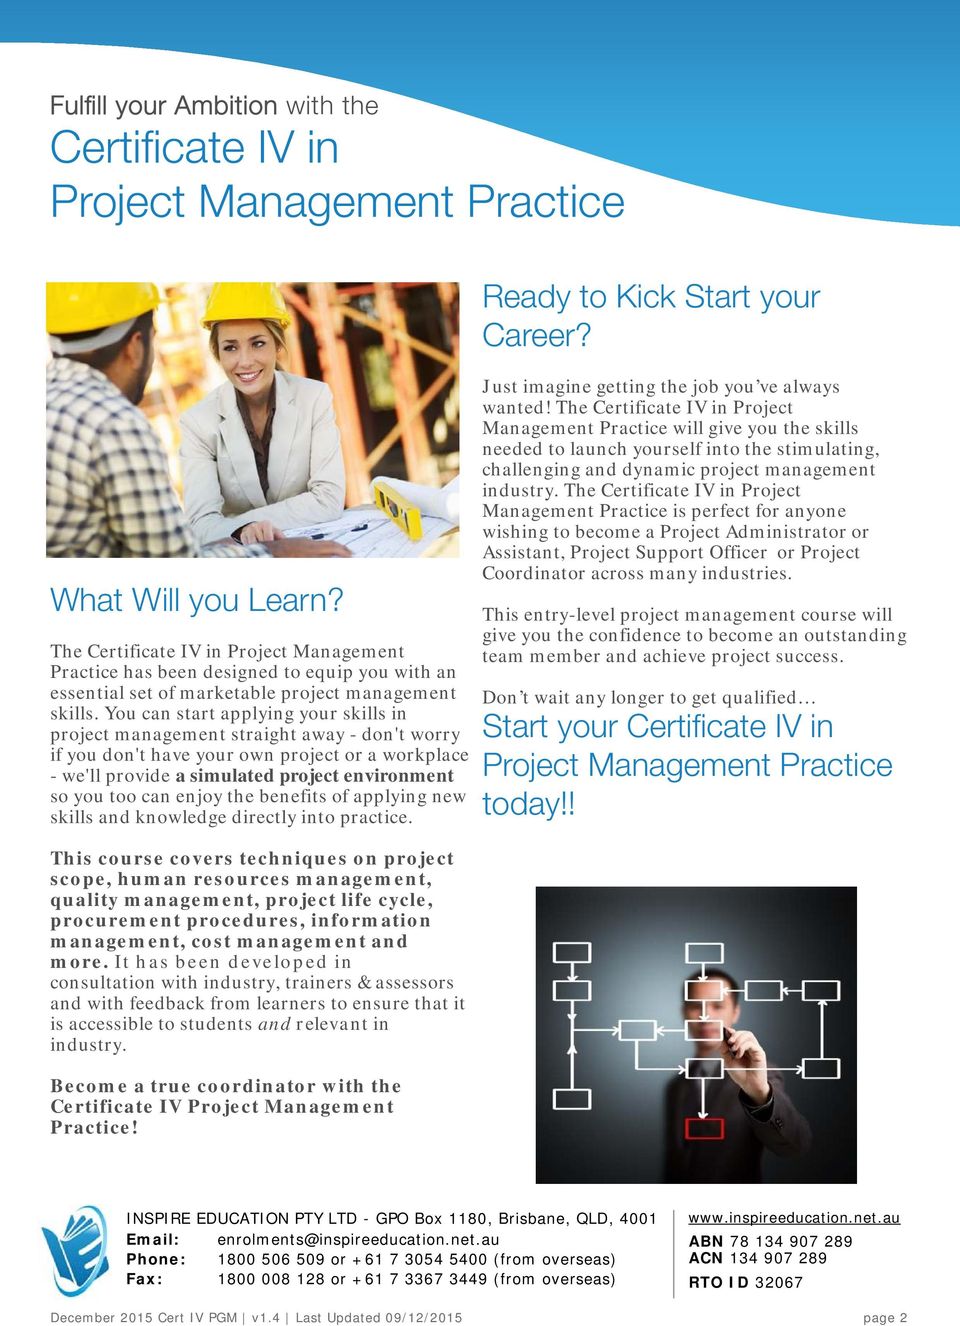 You can start applying your skills in project management straight away - don't worry if you don't have your own project or a workplace - we'll provide a simulated project environment so you too can